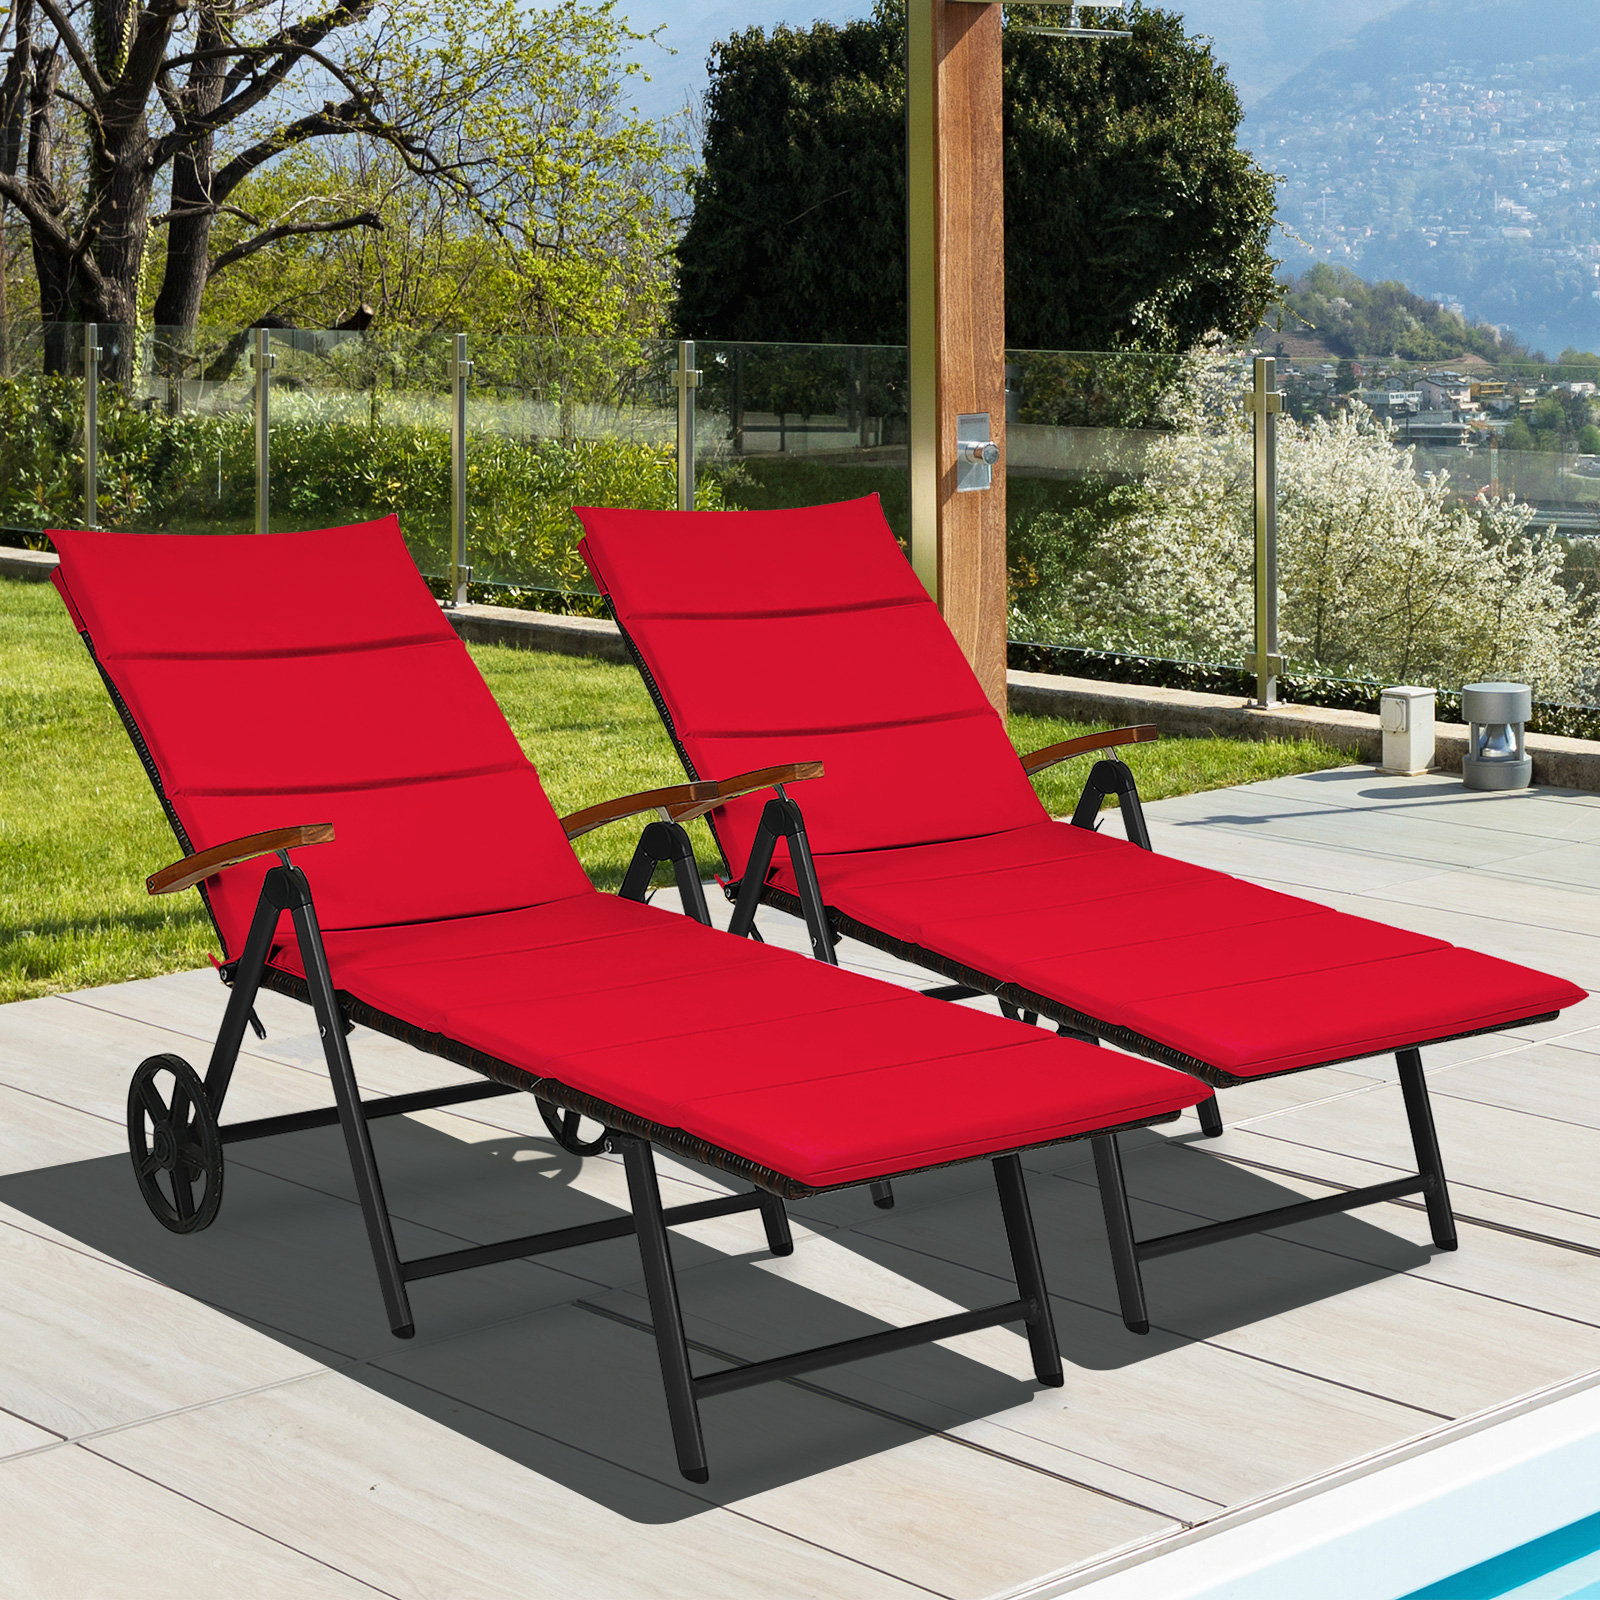 Patiojoy 2PCS Foldable Beach Sling Chair with 7 Adjustable Positions&Cushion Indoor Living Room Chaise Lounge Red - image 2 of 8